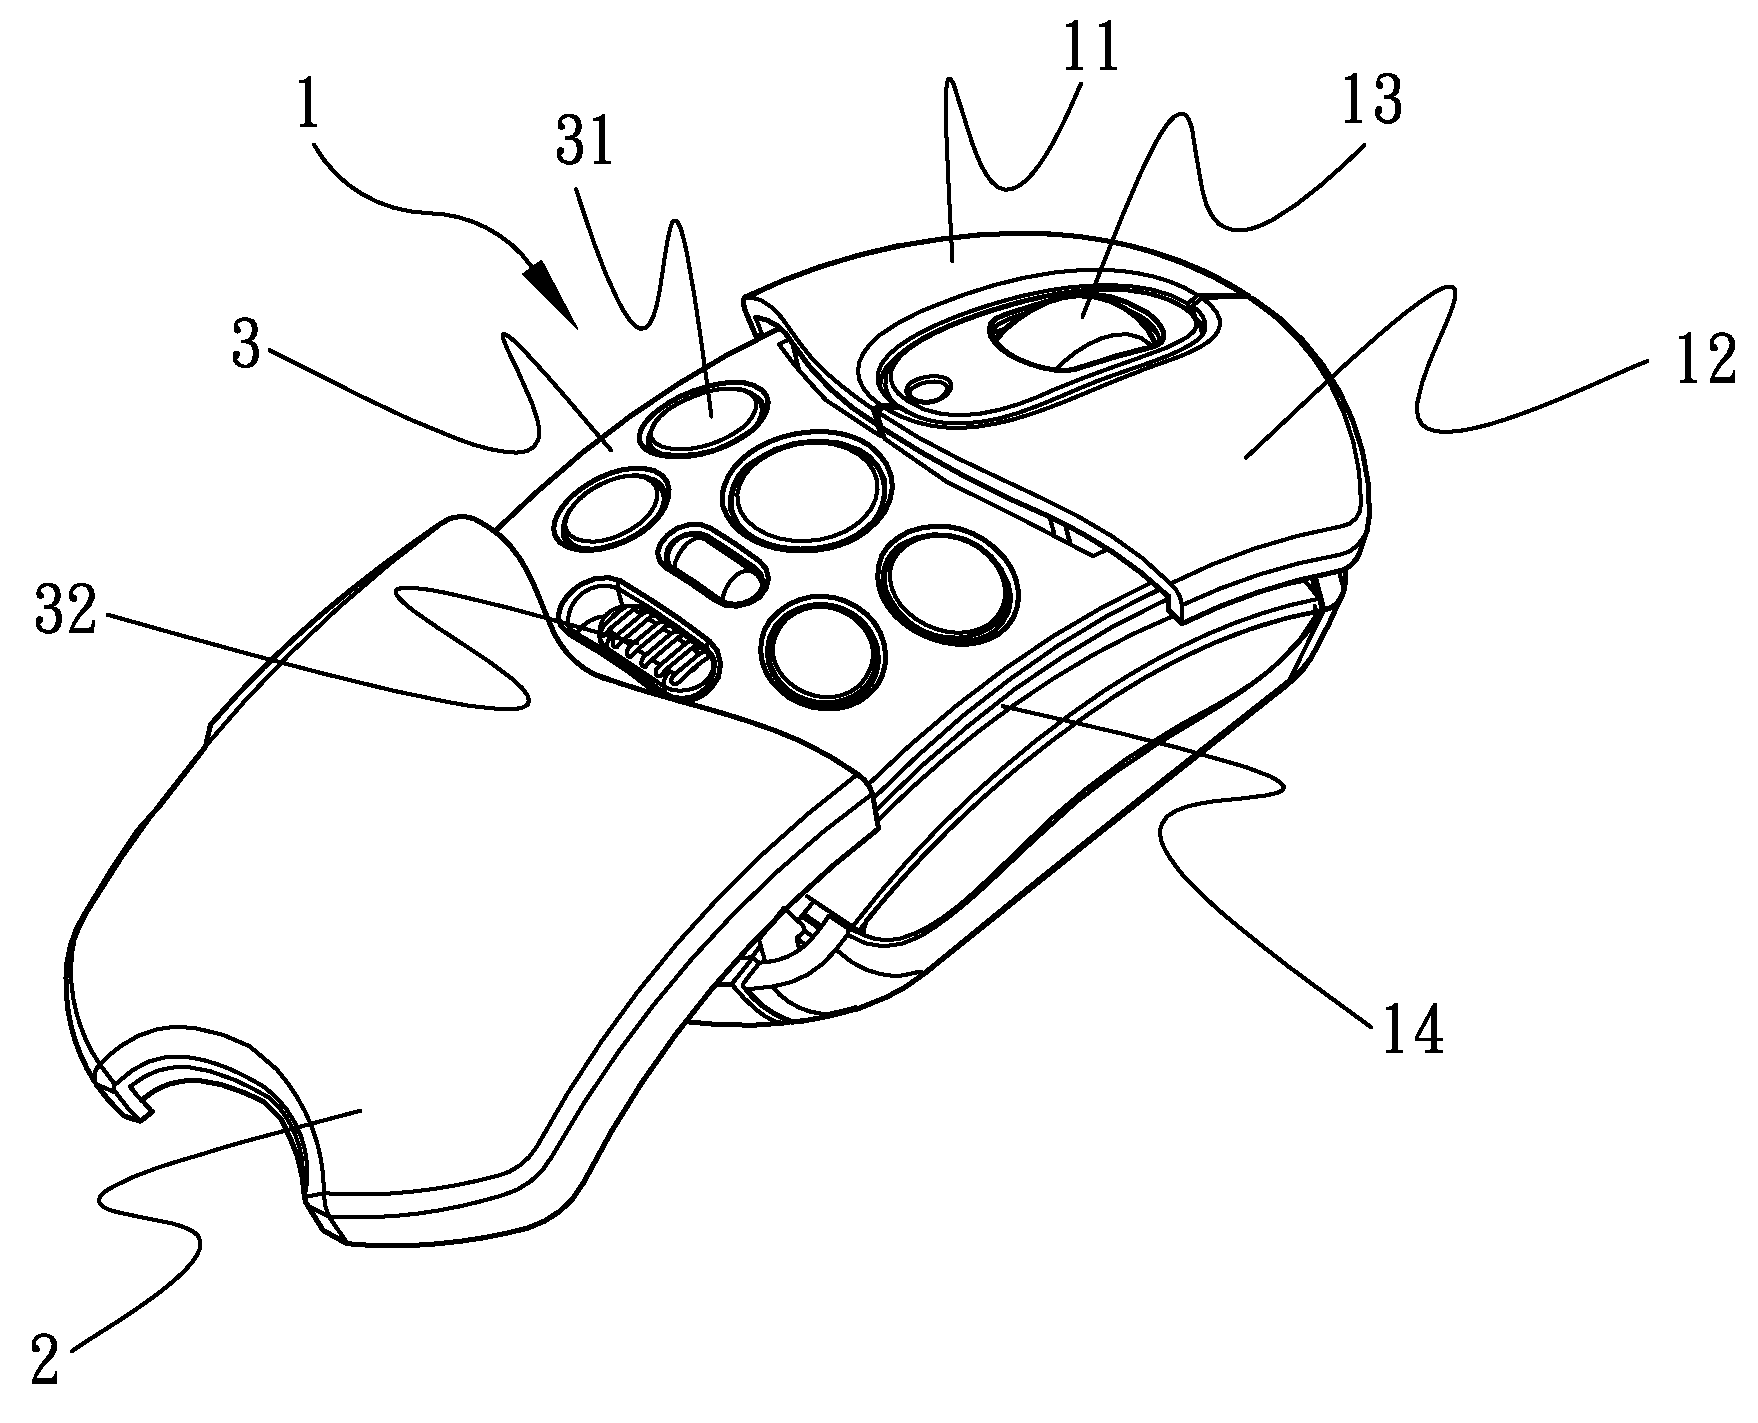 Computer Mouse with a Sliding Cover